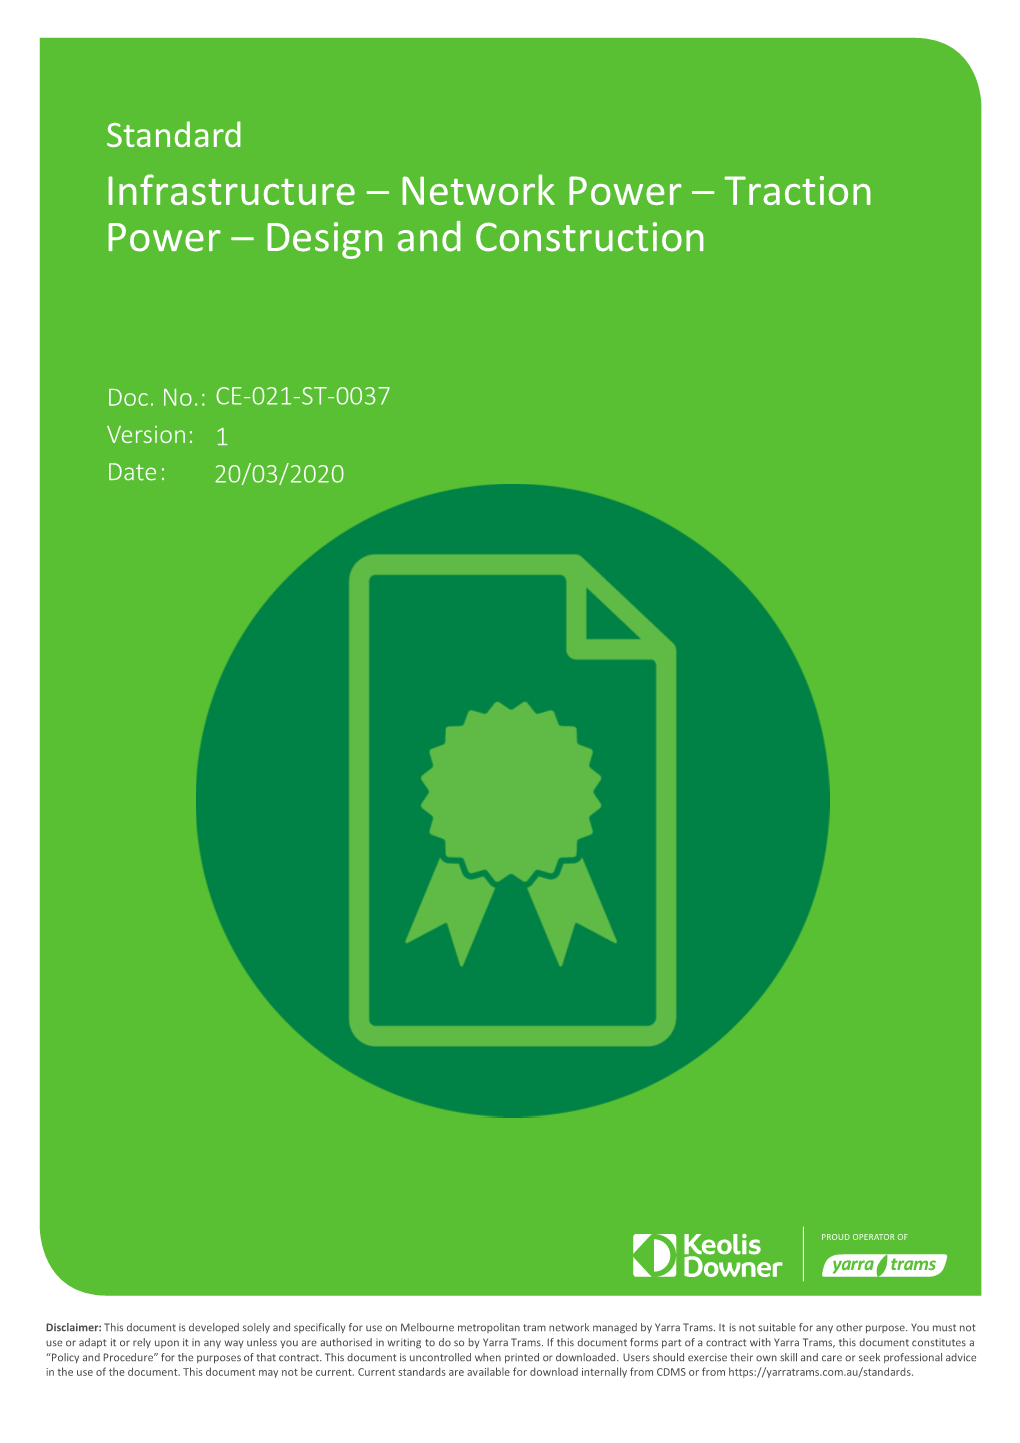 Infrastructure – Network Power – Traction Power – Design and Construction